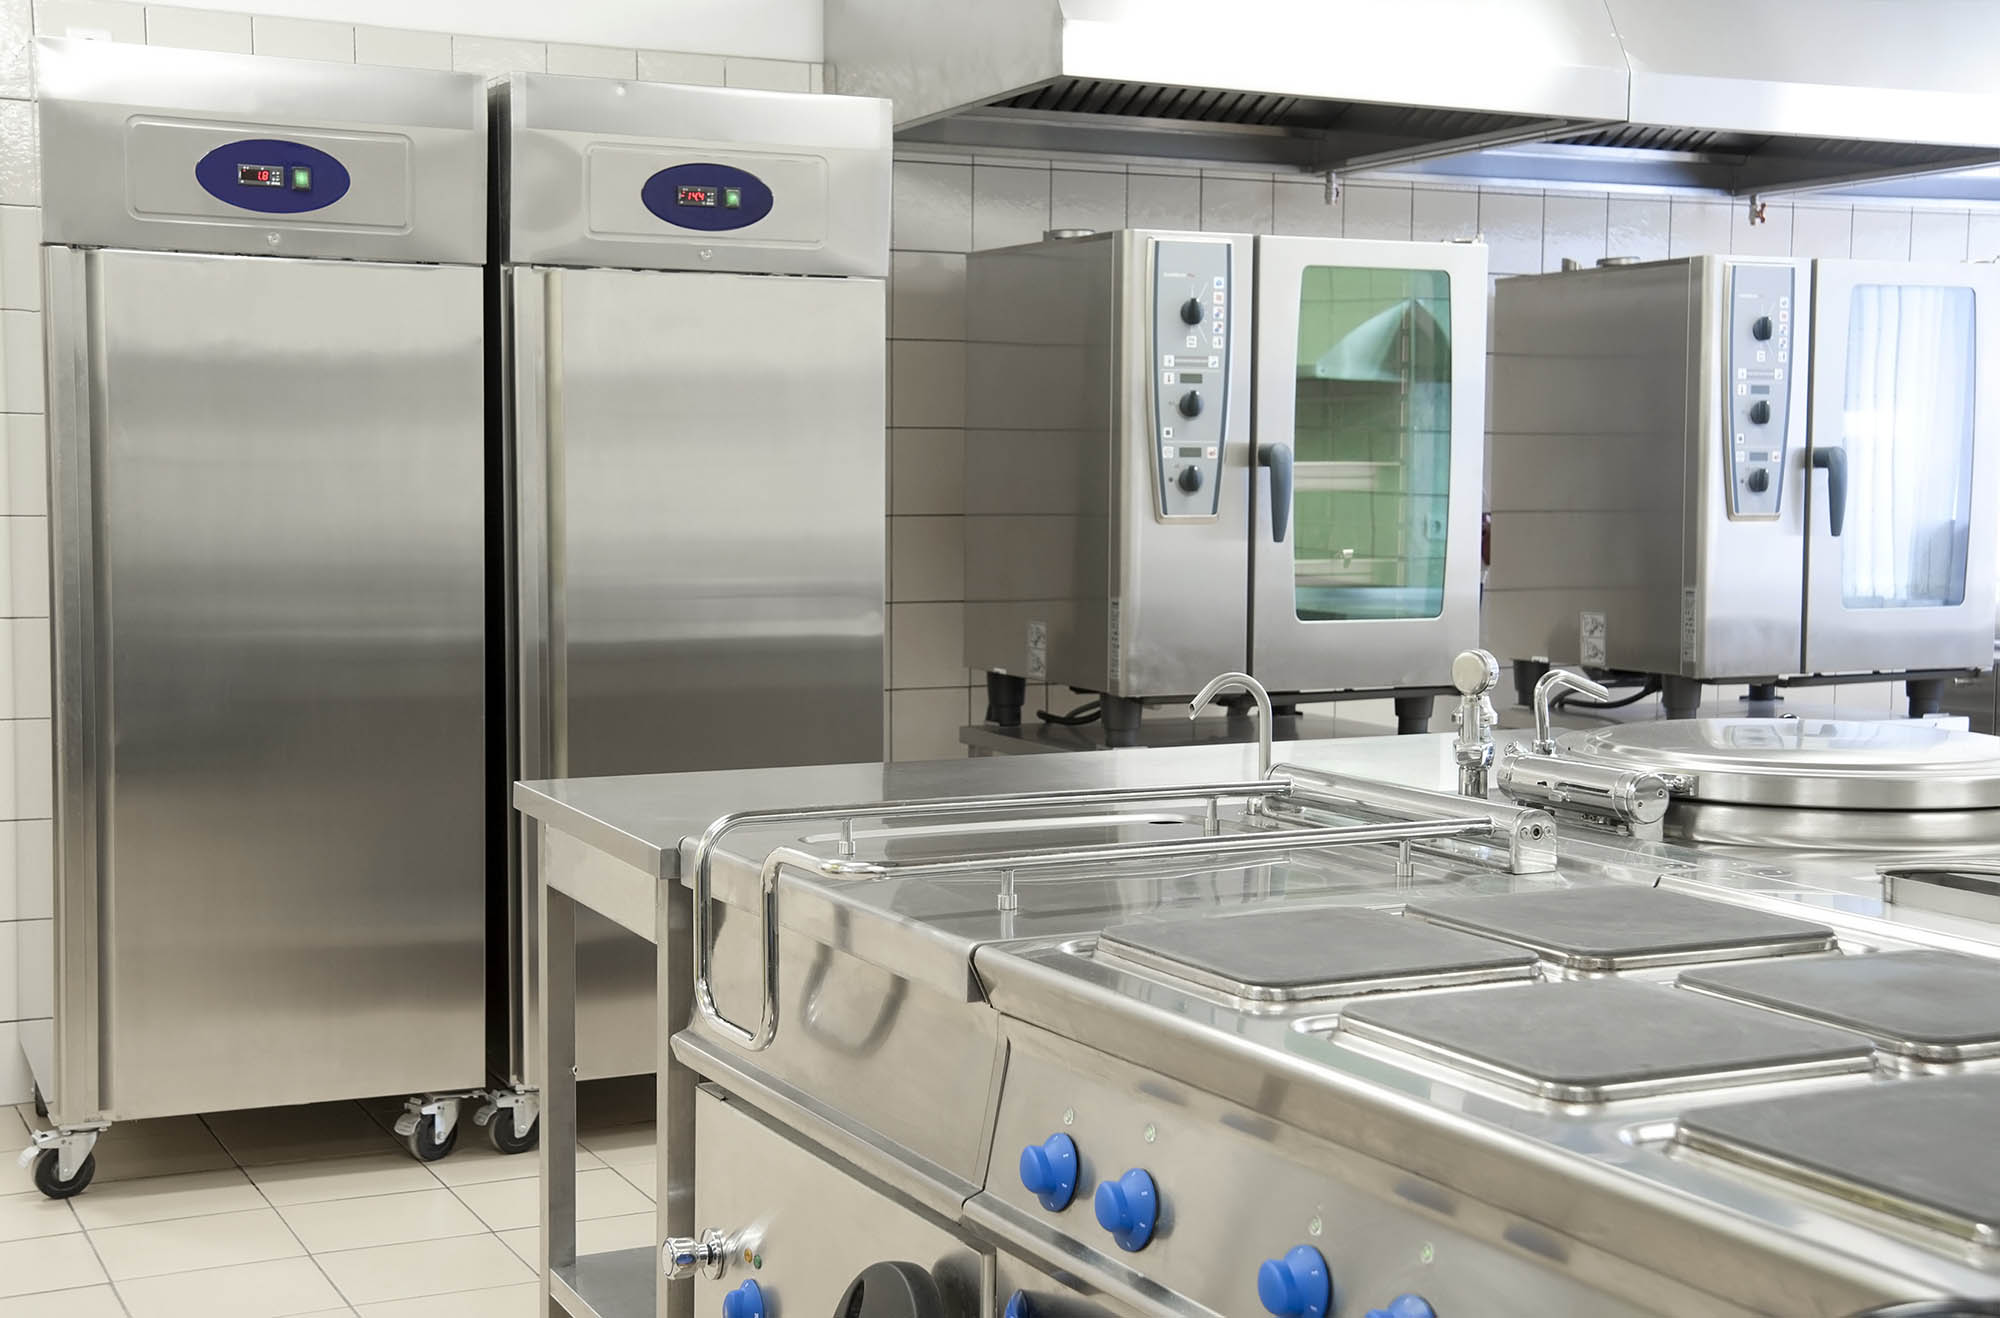 Inside a professional kitchen with new equipment to demonstrate business loans for equipment financing